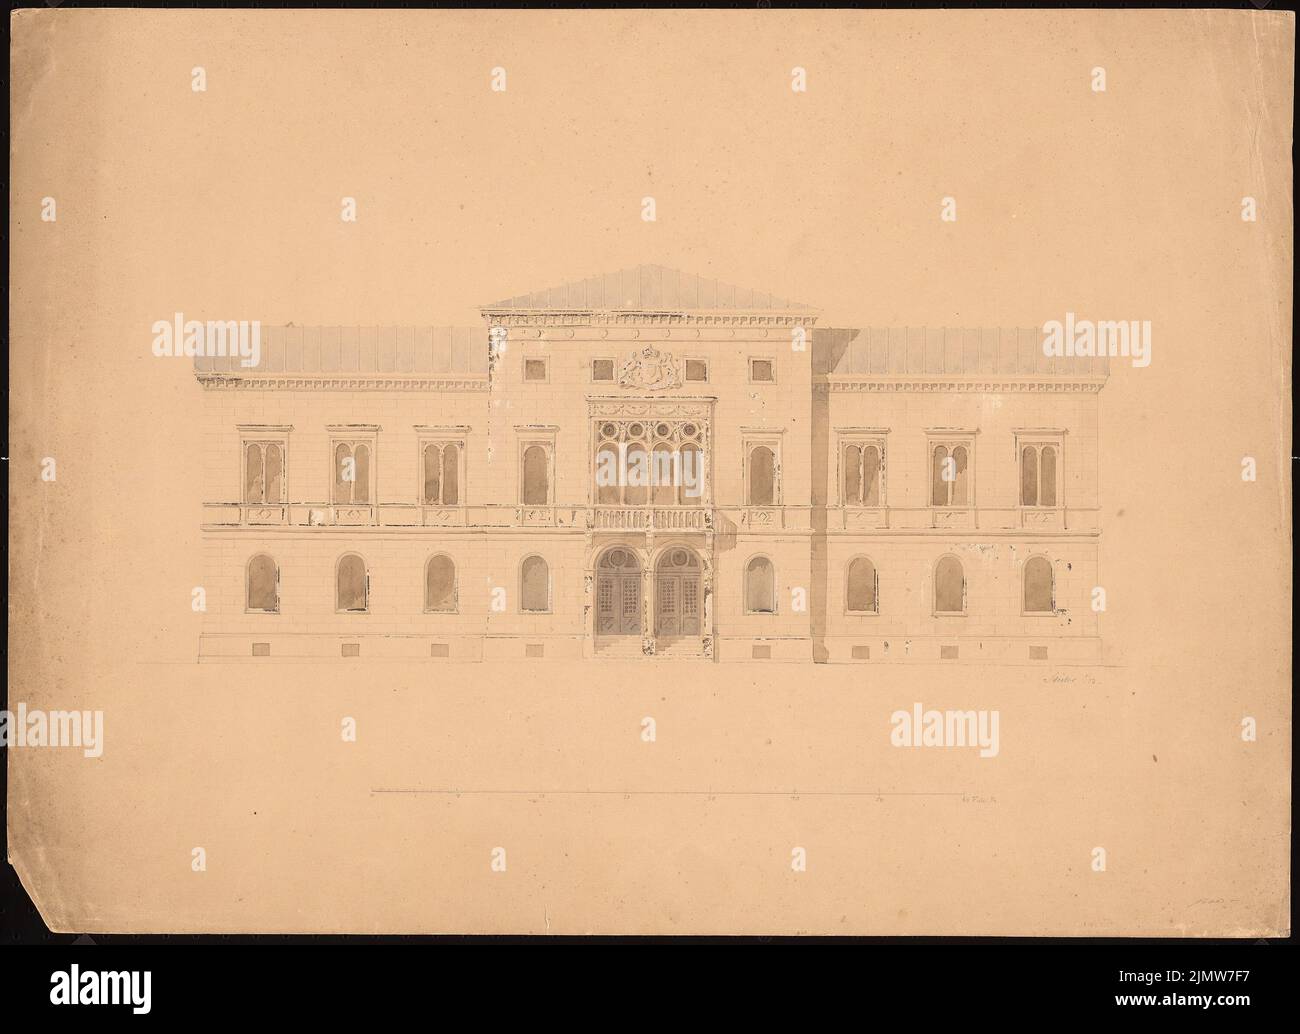 Stüler August (1800-1865), Palais of the Prince of Hohenzollern-Hechlingen in Löwenberg (1853): View, scale bar in foot. Pencil and ink watercolor on the box, 44.1 x 60.7 cm (including scan edges) Stüler Friedrich August  (1800-1865): Palais des Fürsten von Hohenzollern-Hechlingen, Löwenberg Stock Photo